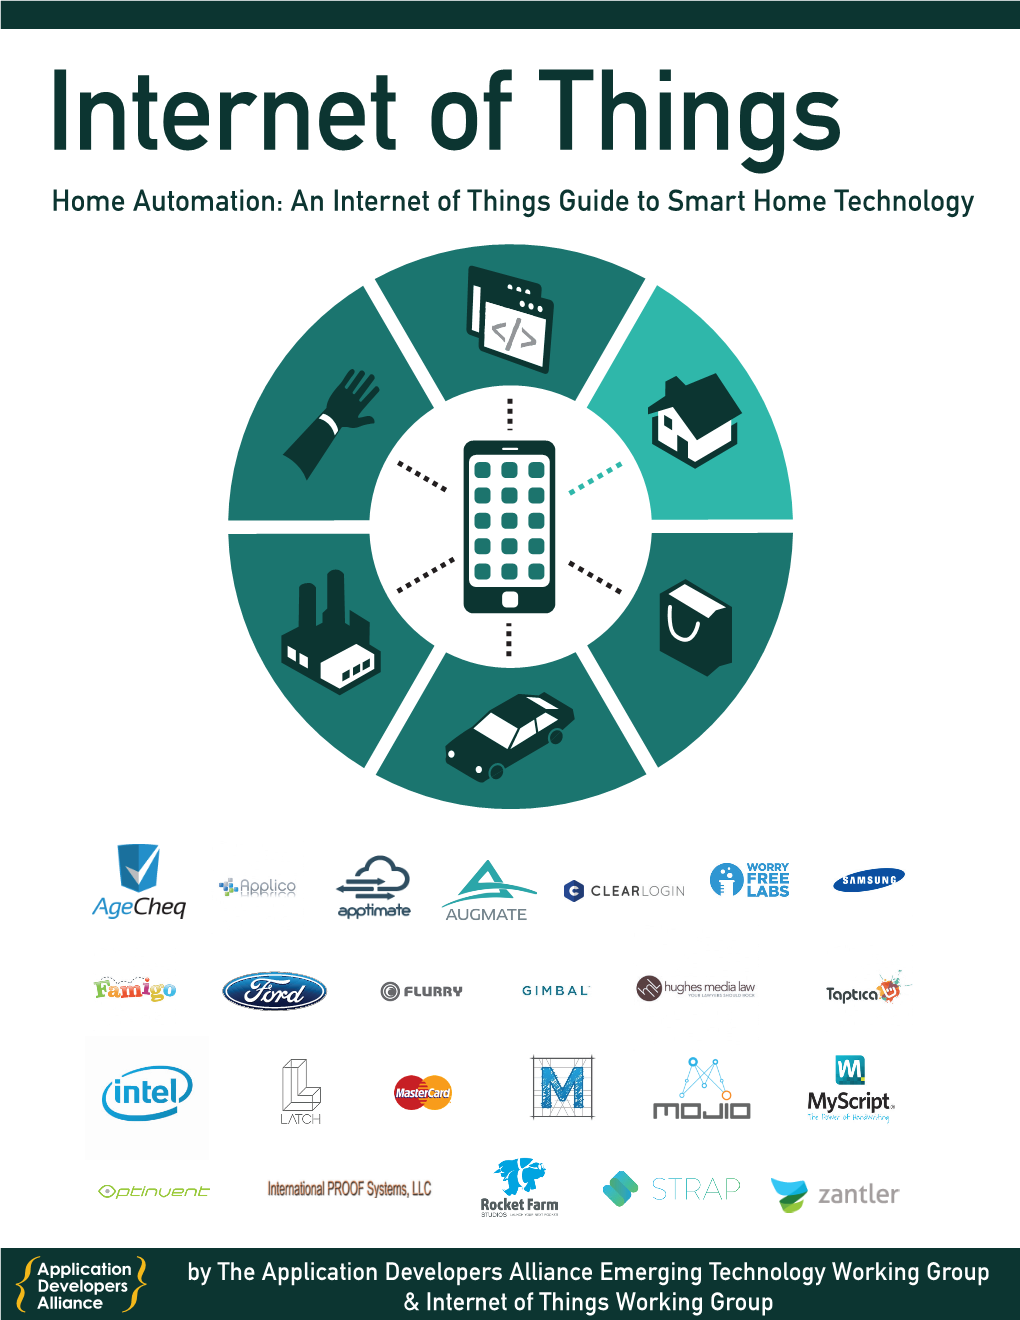 Home Automation: an Internet of Things Guide to Smart Home Technology EXECUTIVE SUMMARY: the Concept of a "Smart Home" Is Not New